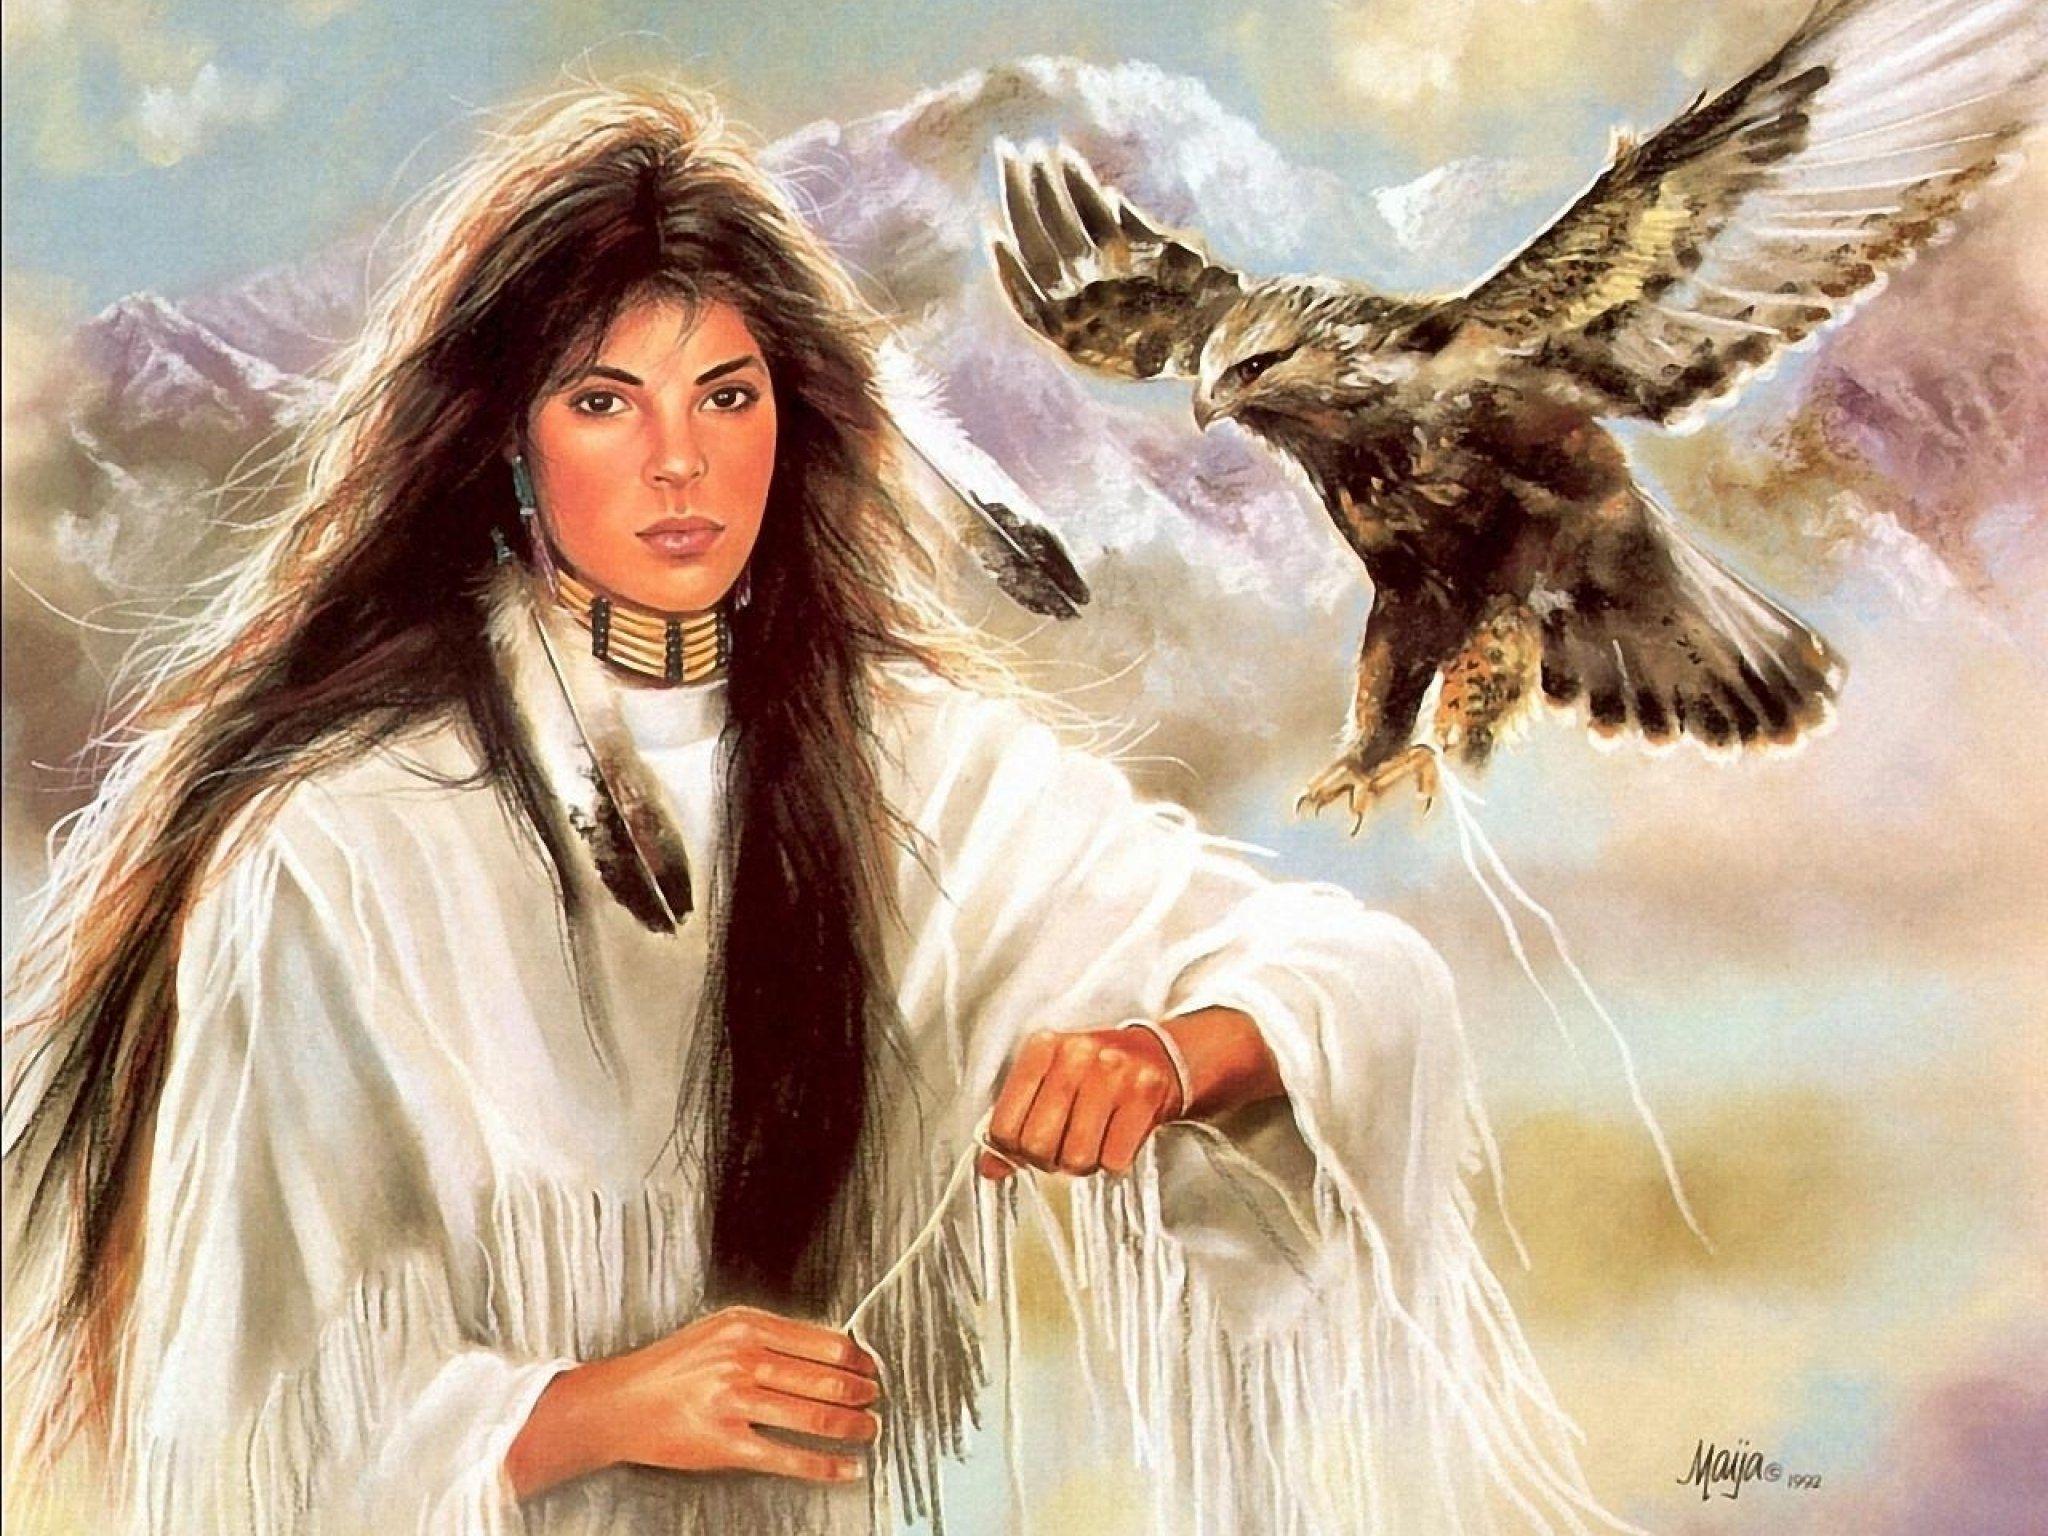 American Indian Wallpaper, Picture